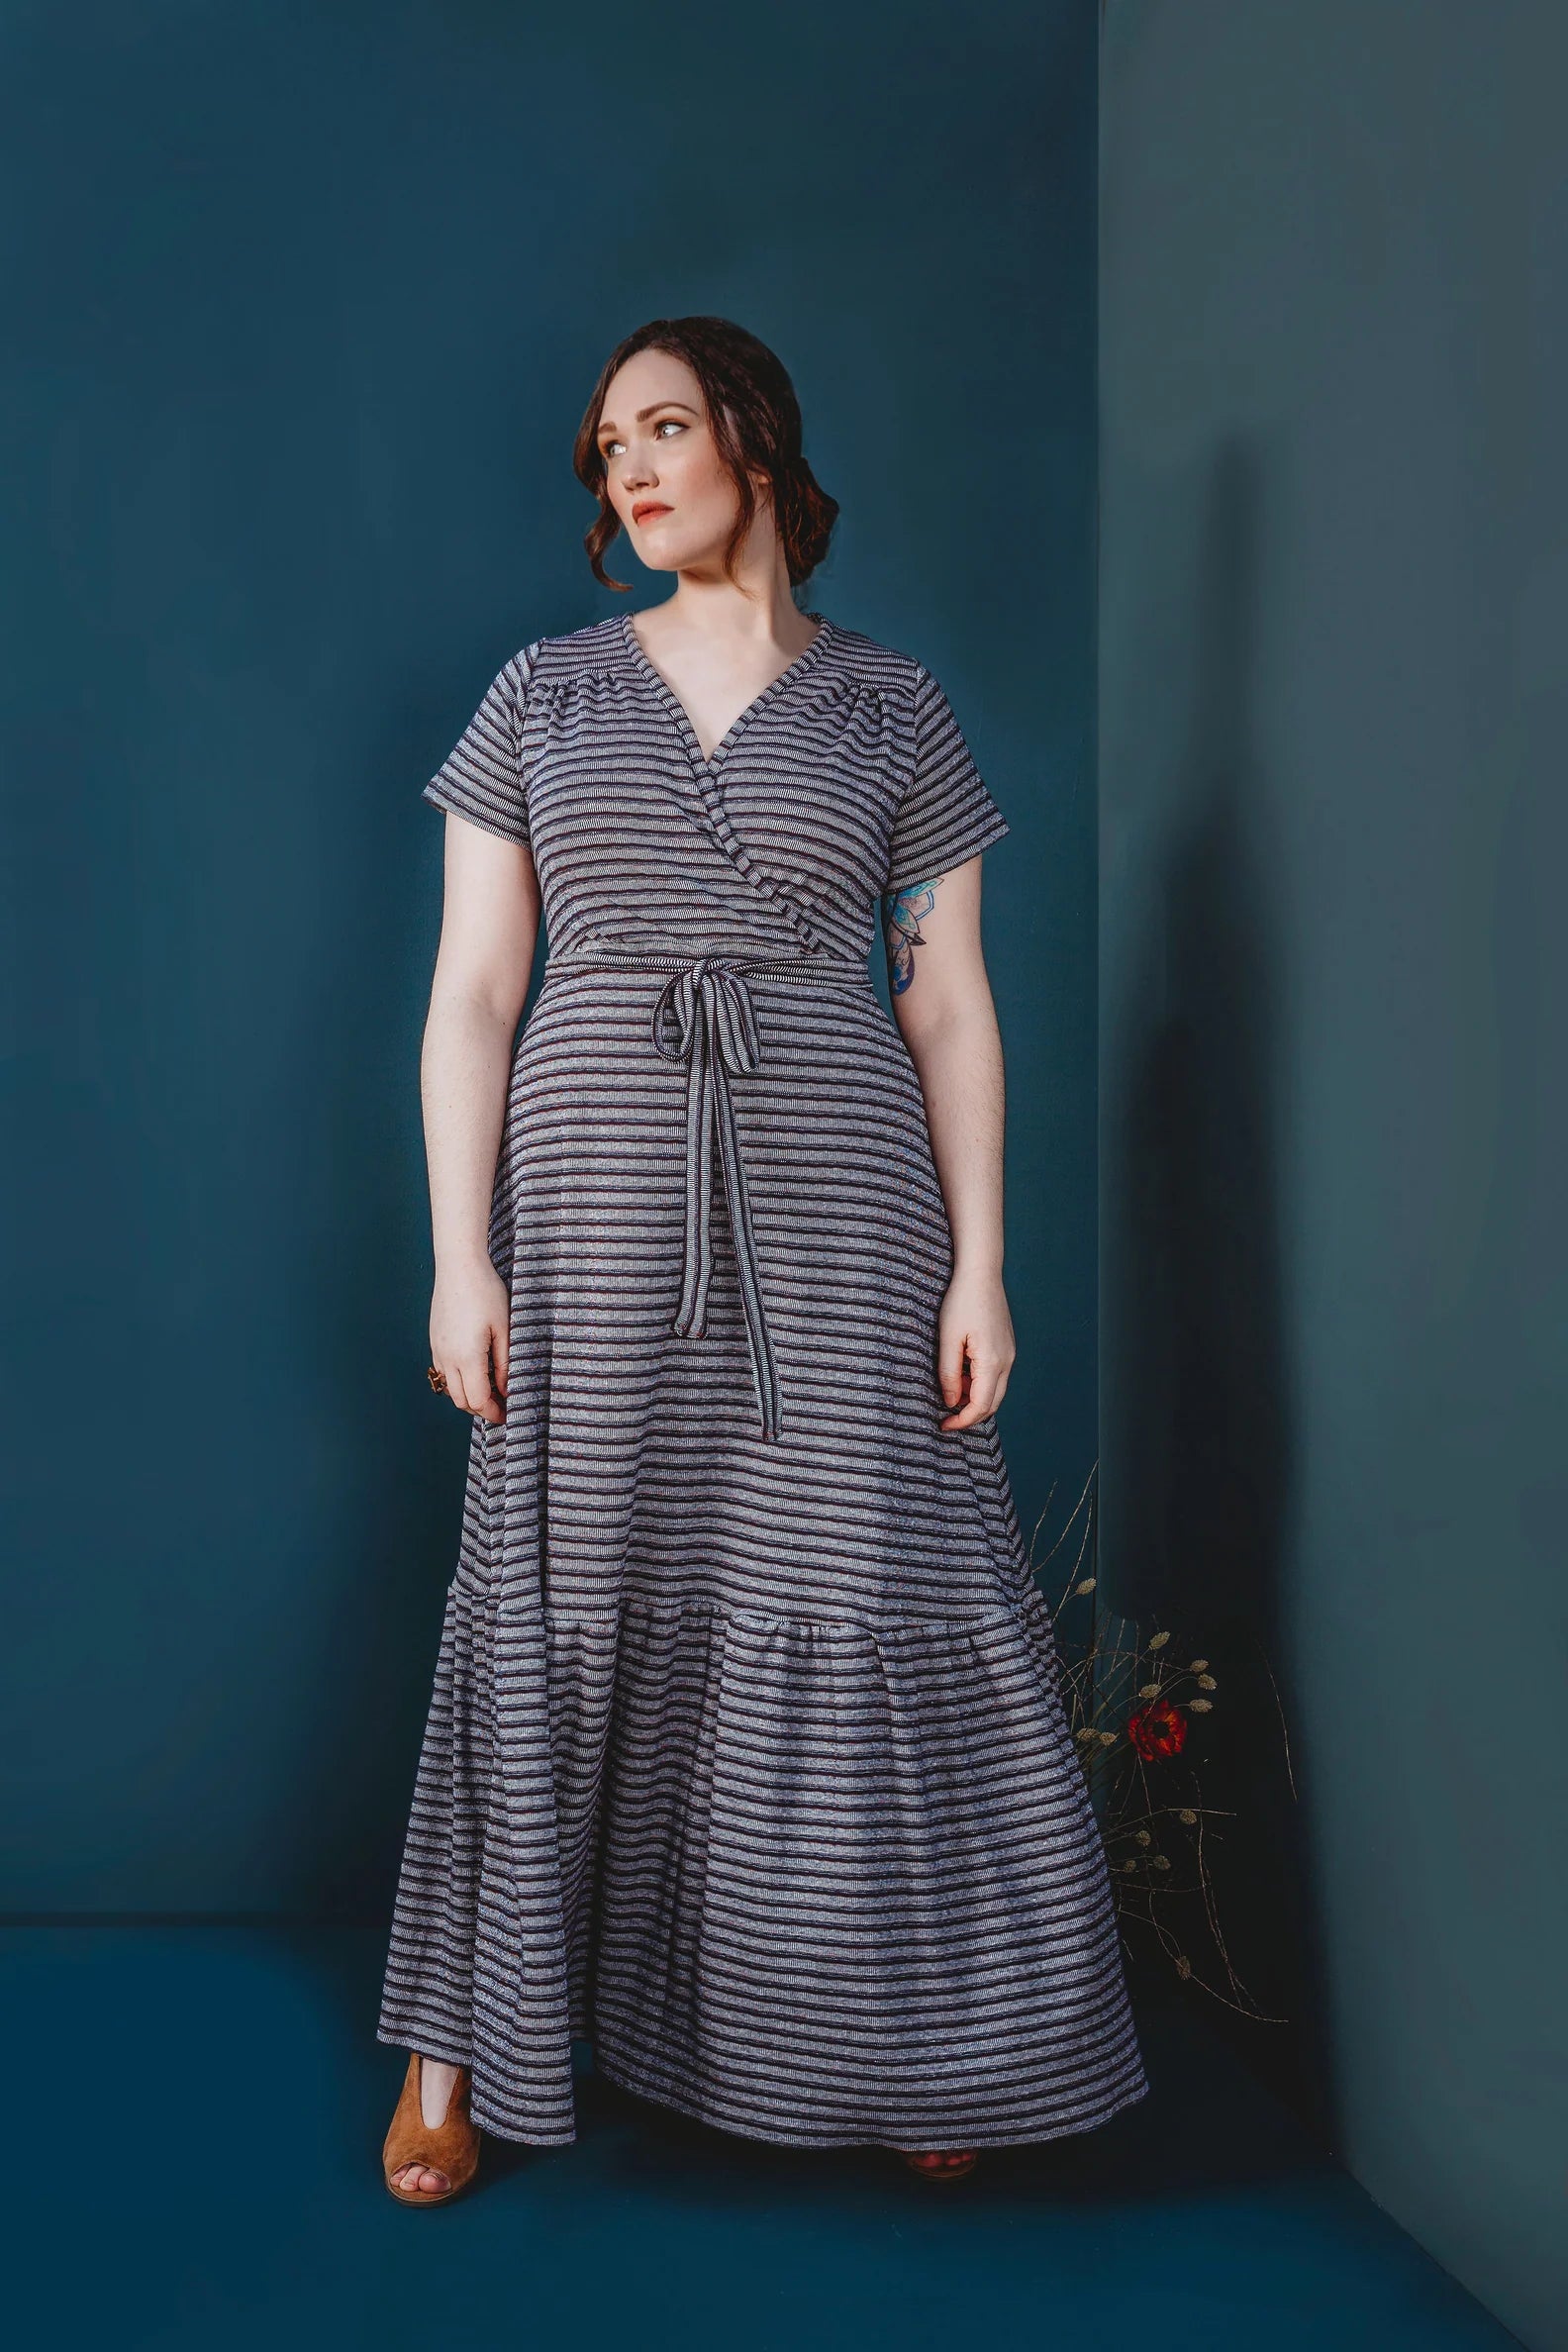 Buy The Westcliff dress sewing pattern from Friday Pattern Company.